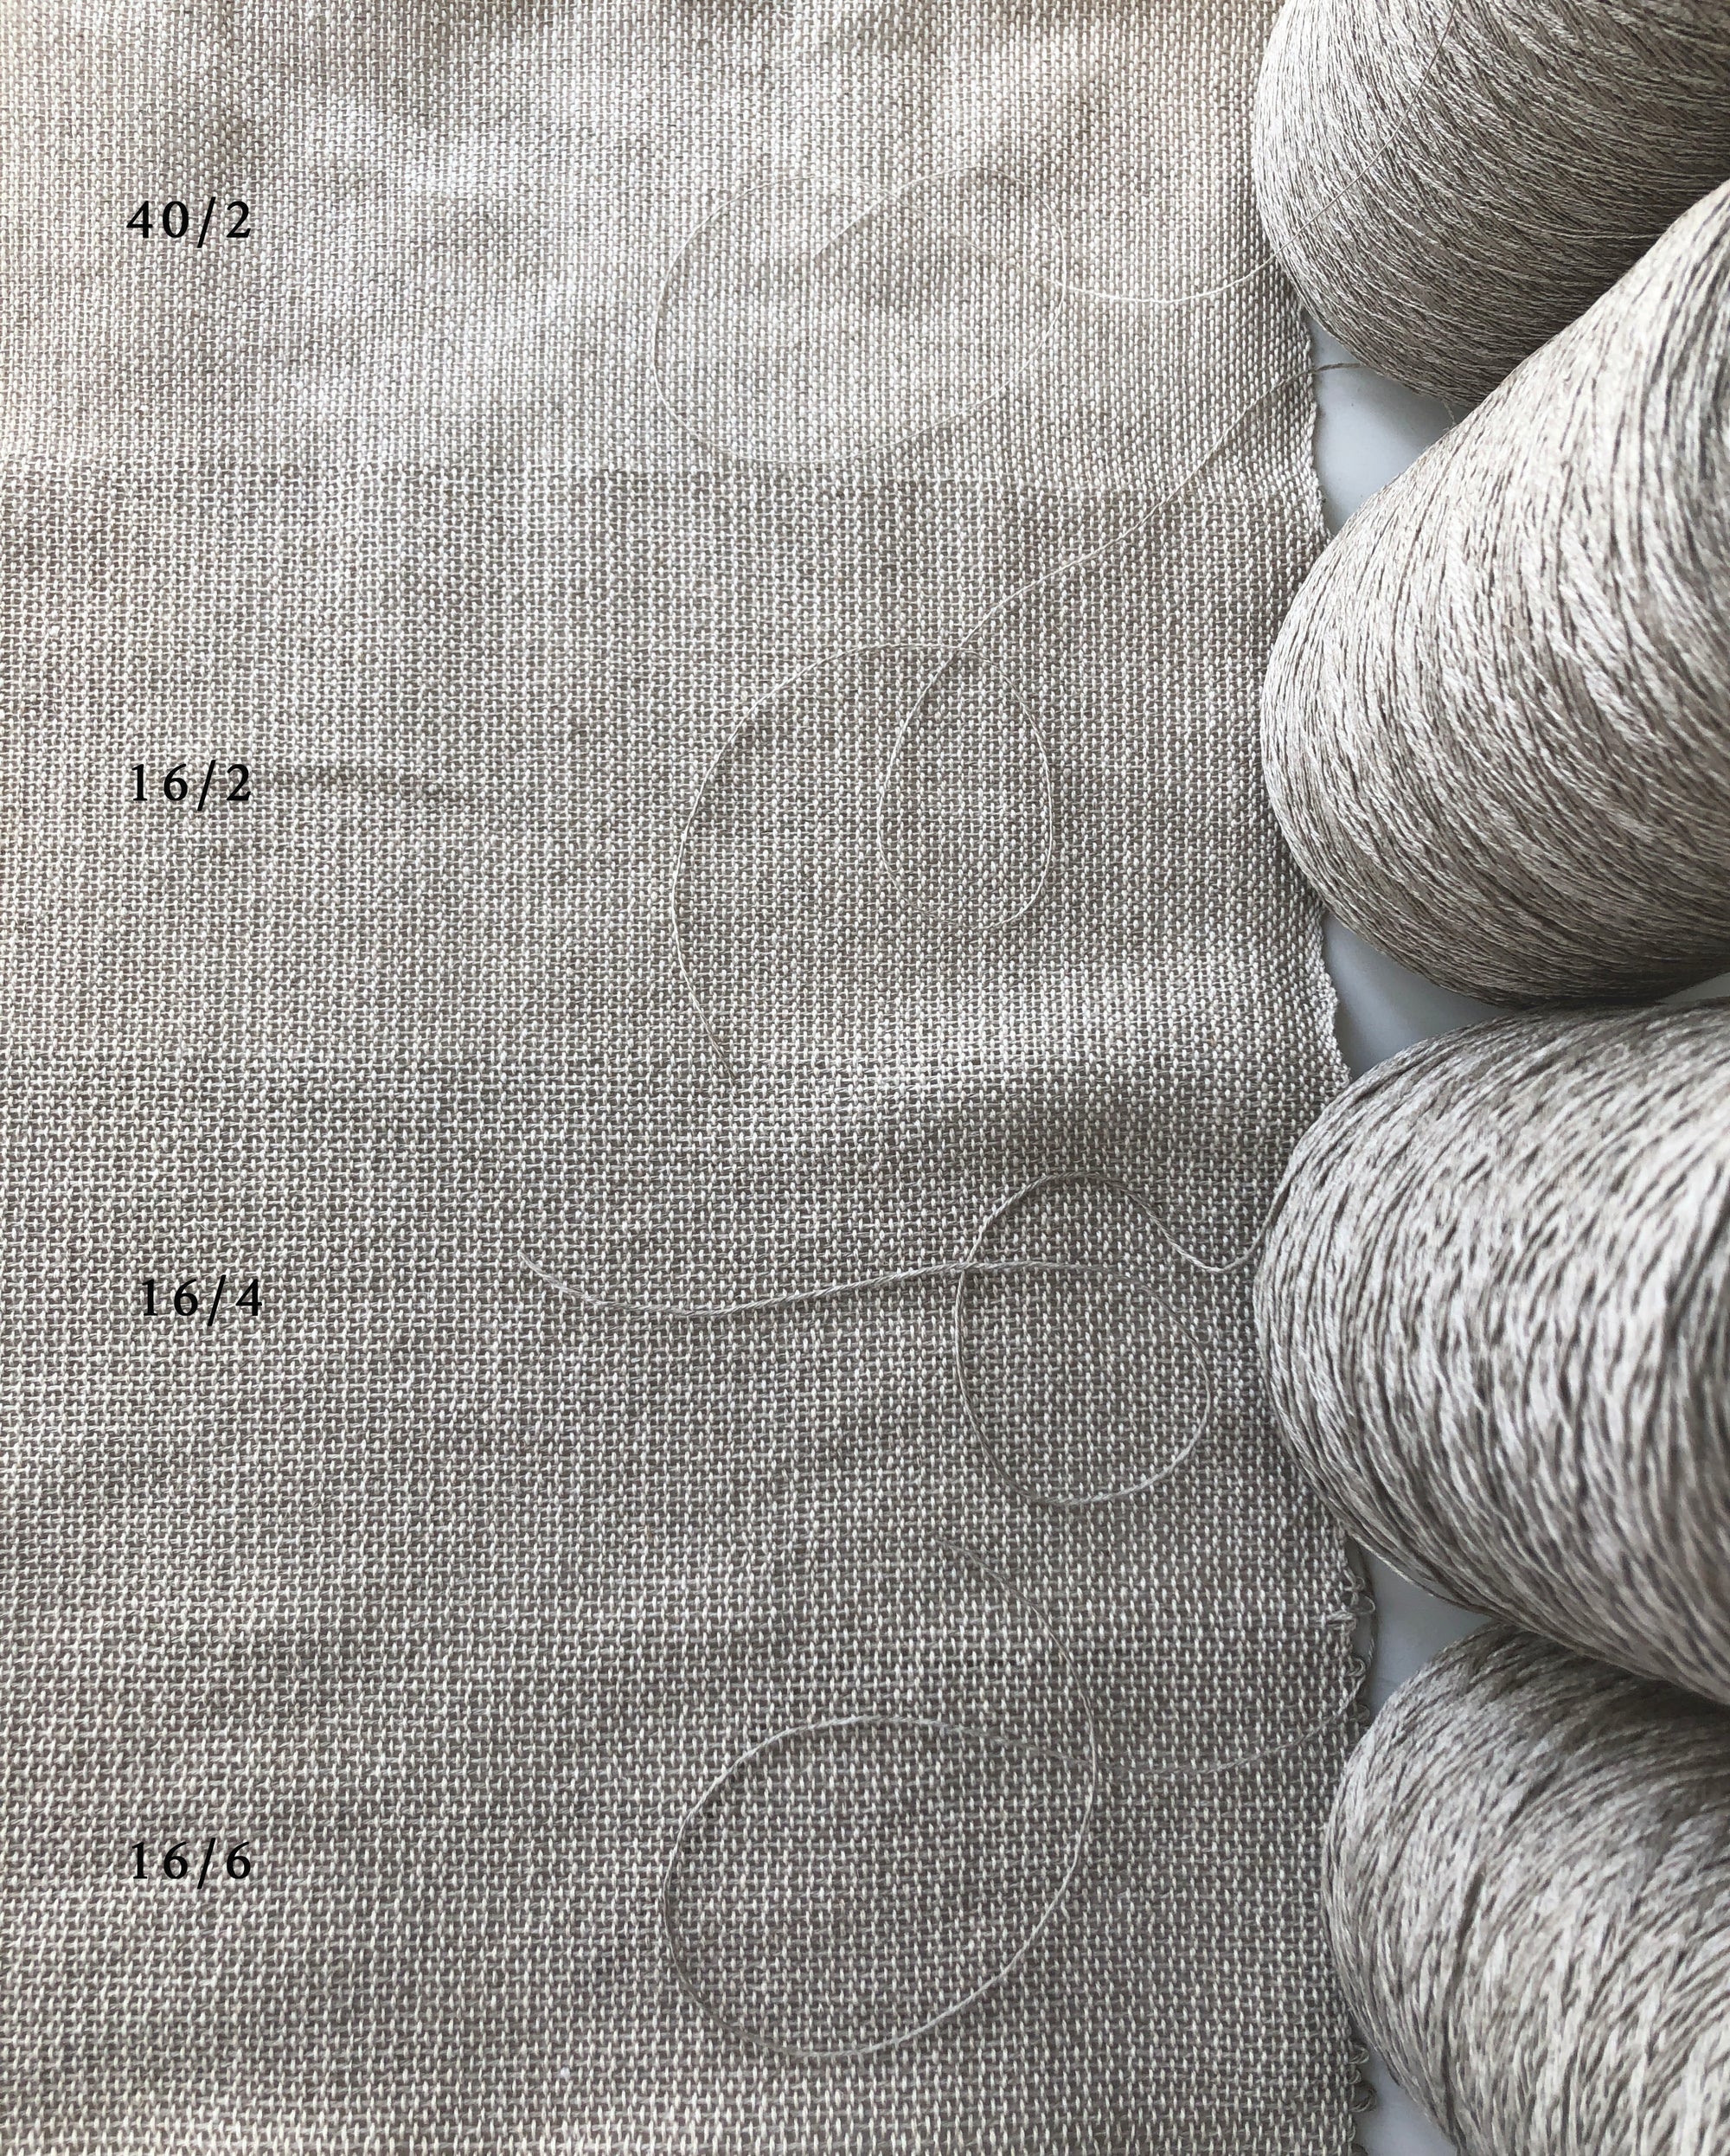 Normandy Linen - All Sizes